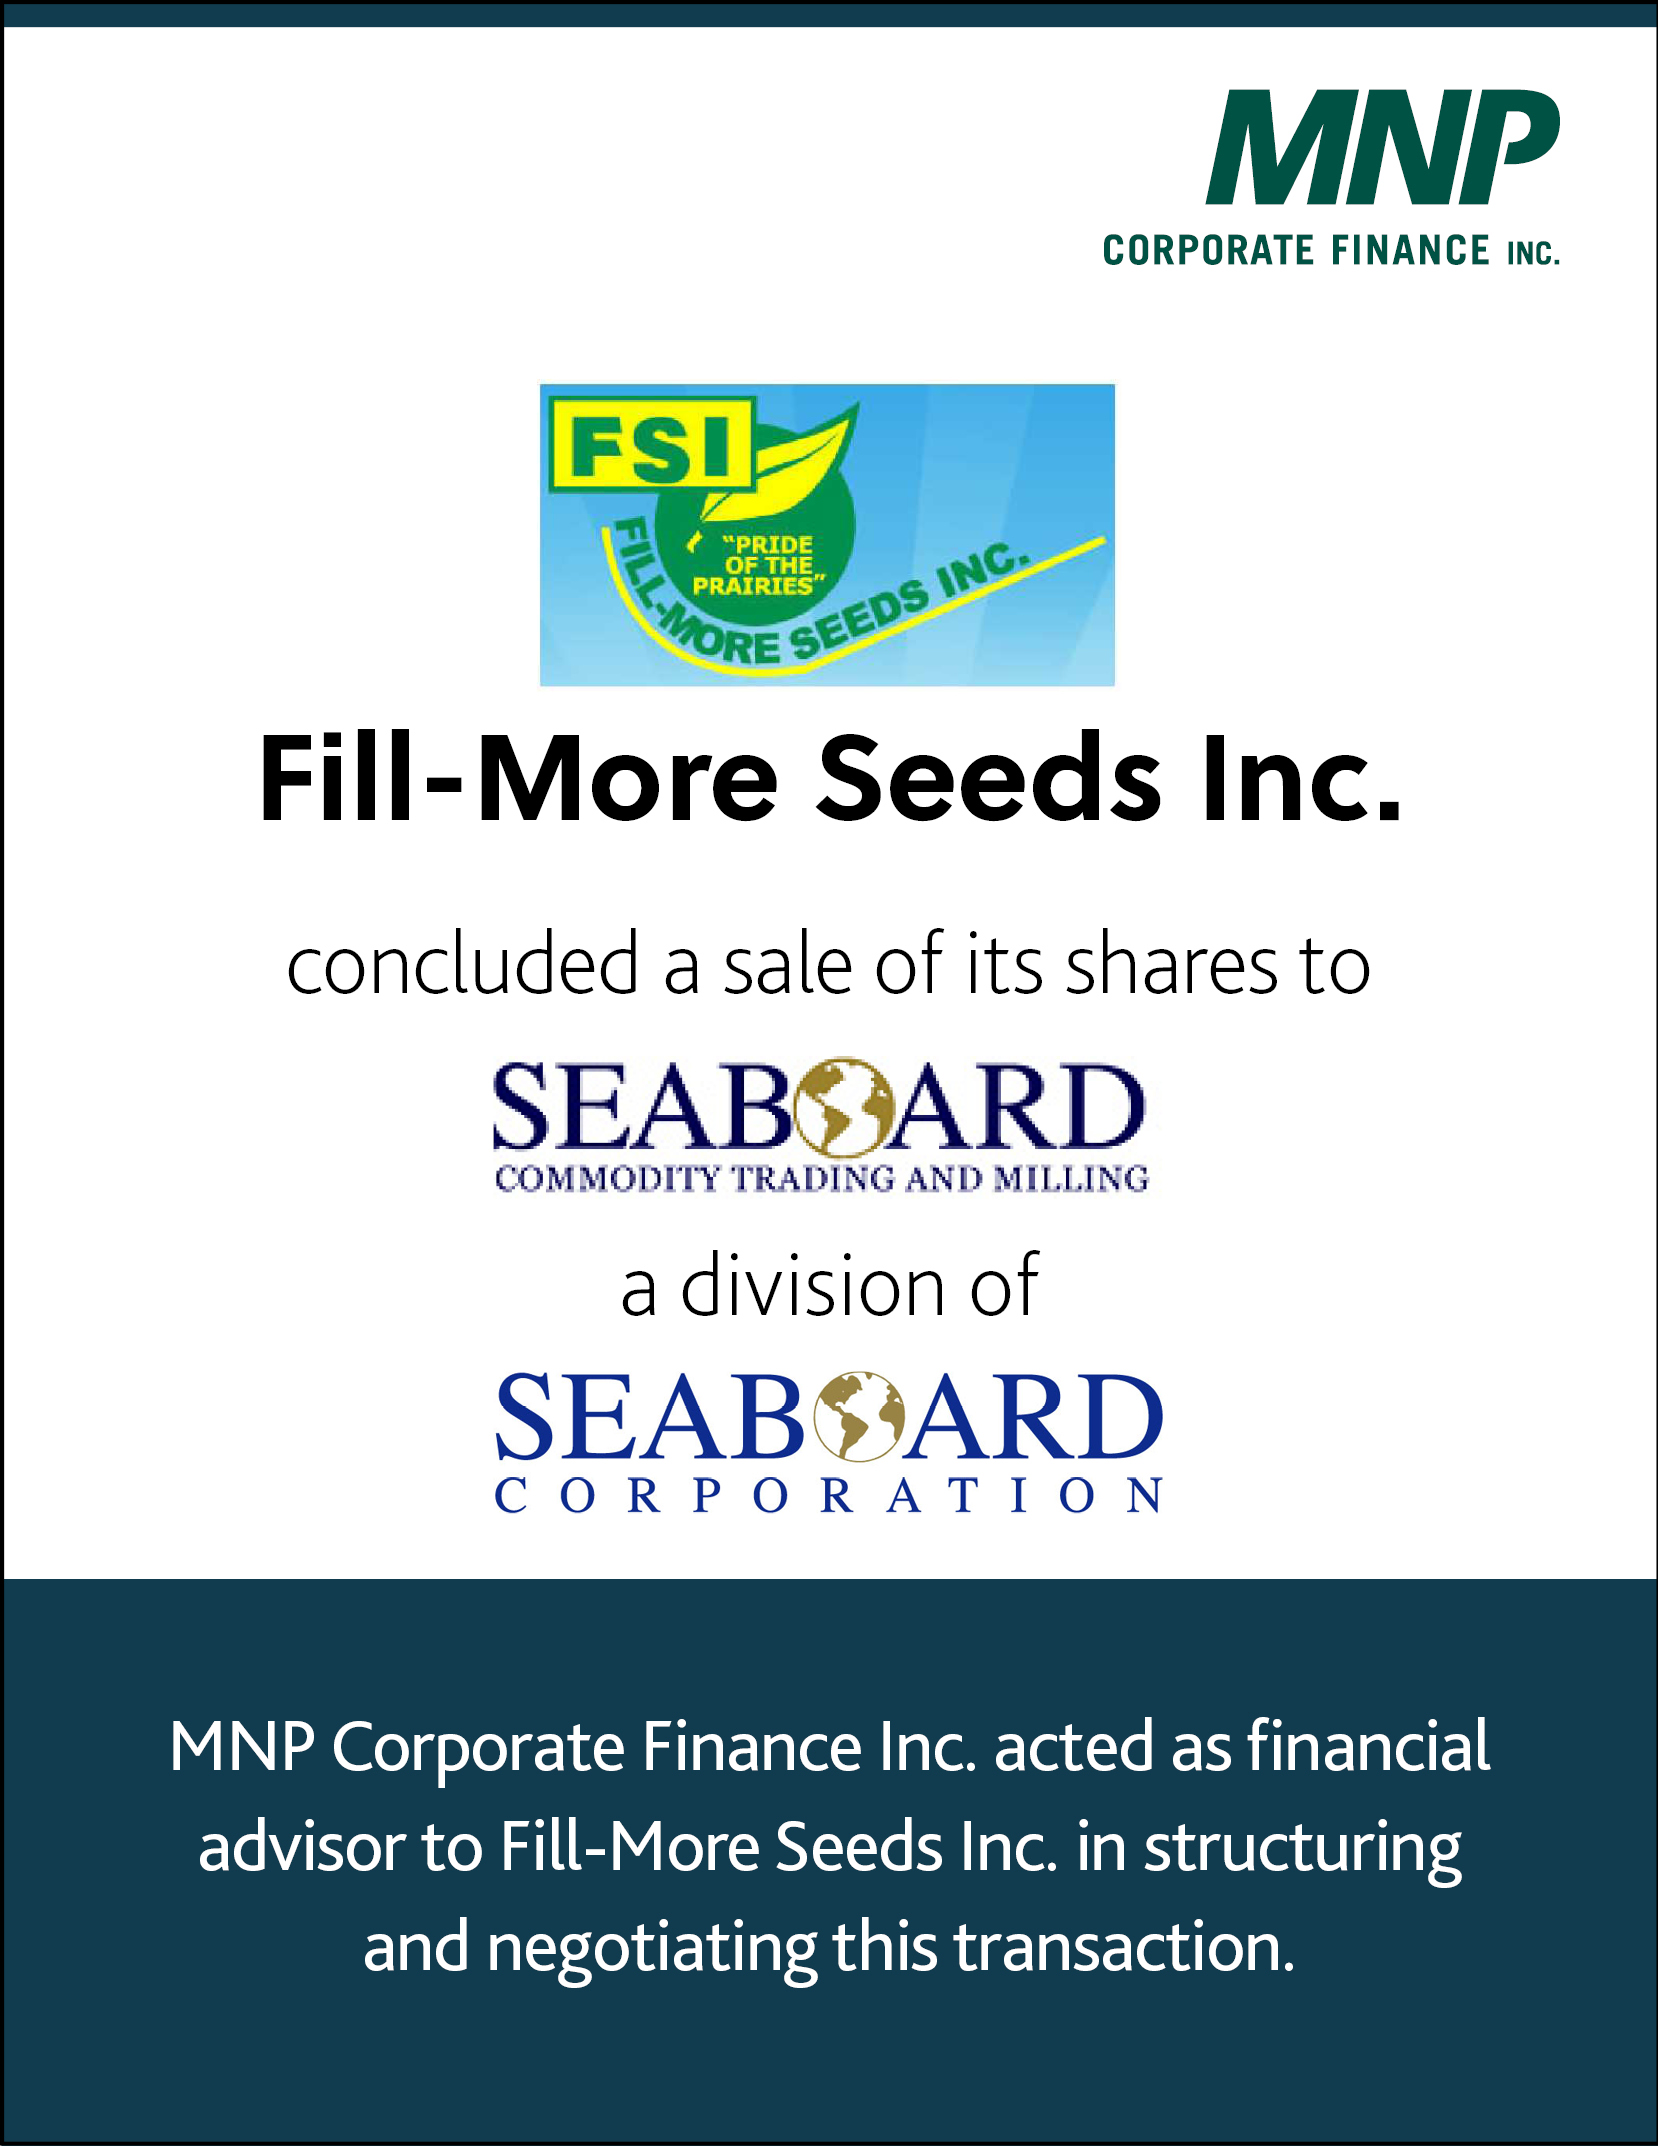 Fill-More Seed Inc concluded a sale of its shares to Seaboard a division if Seaboard Corporation  